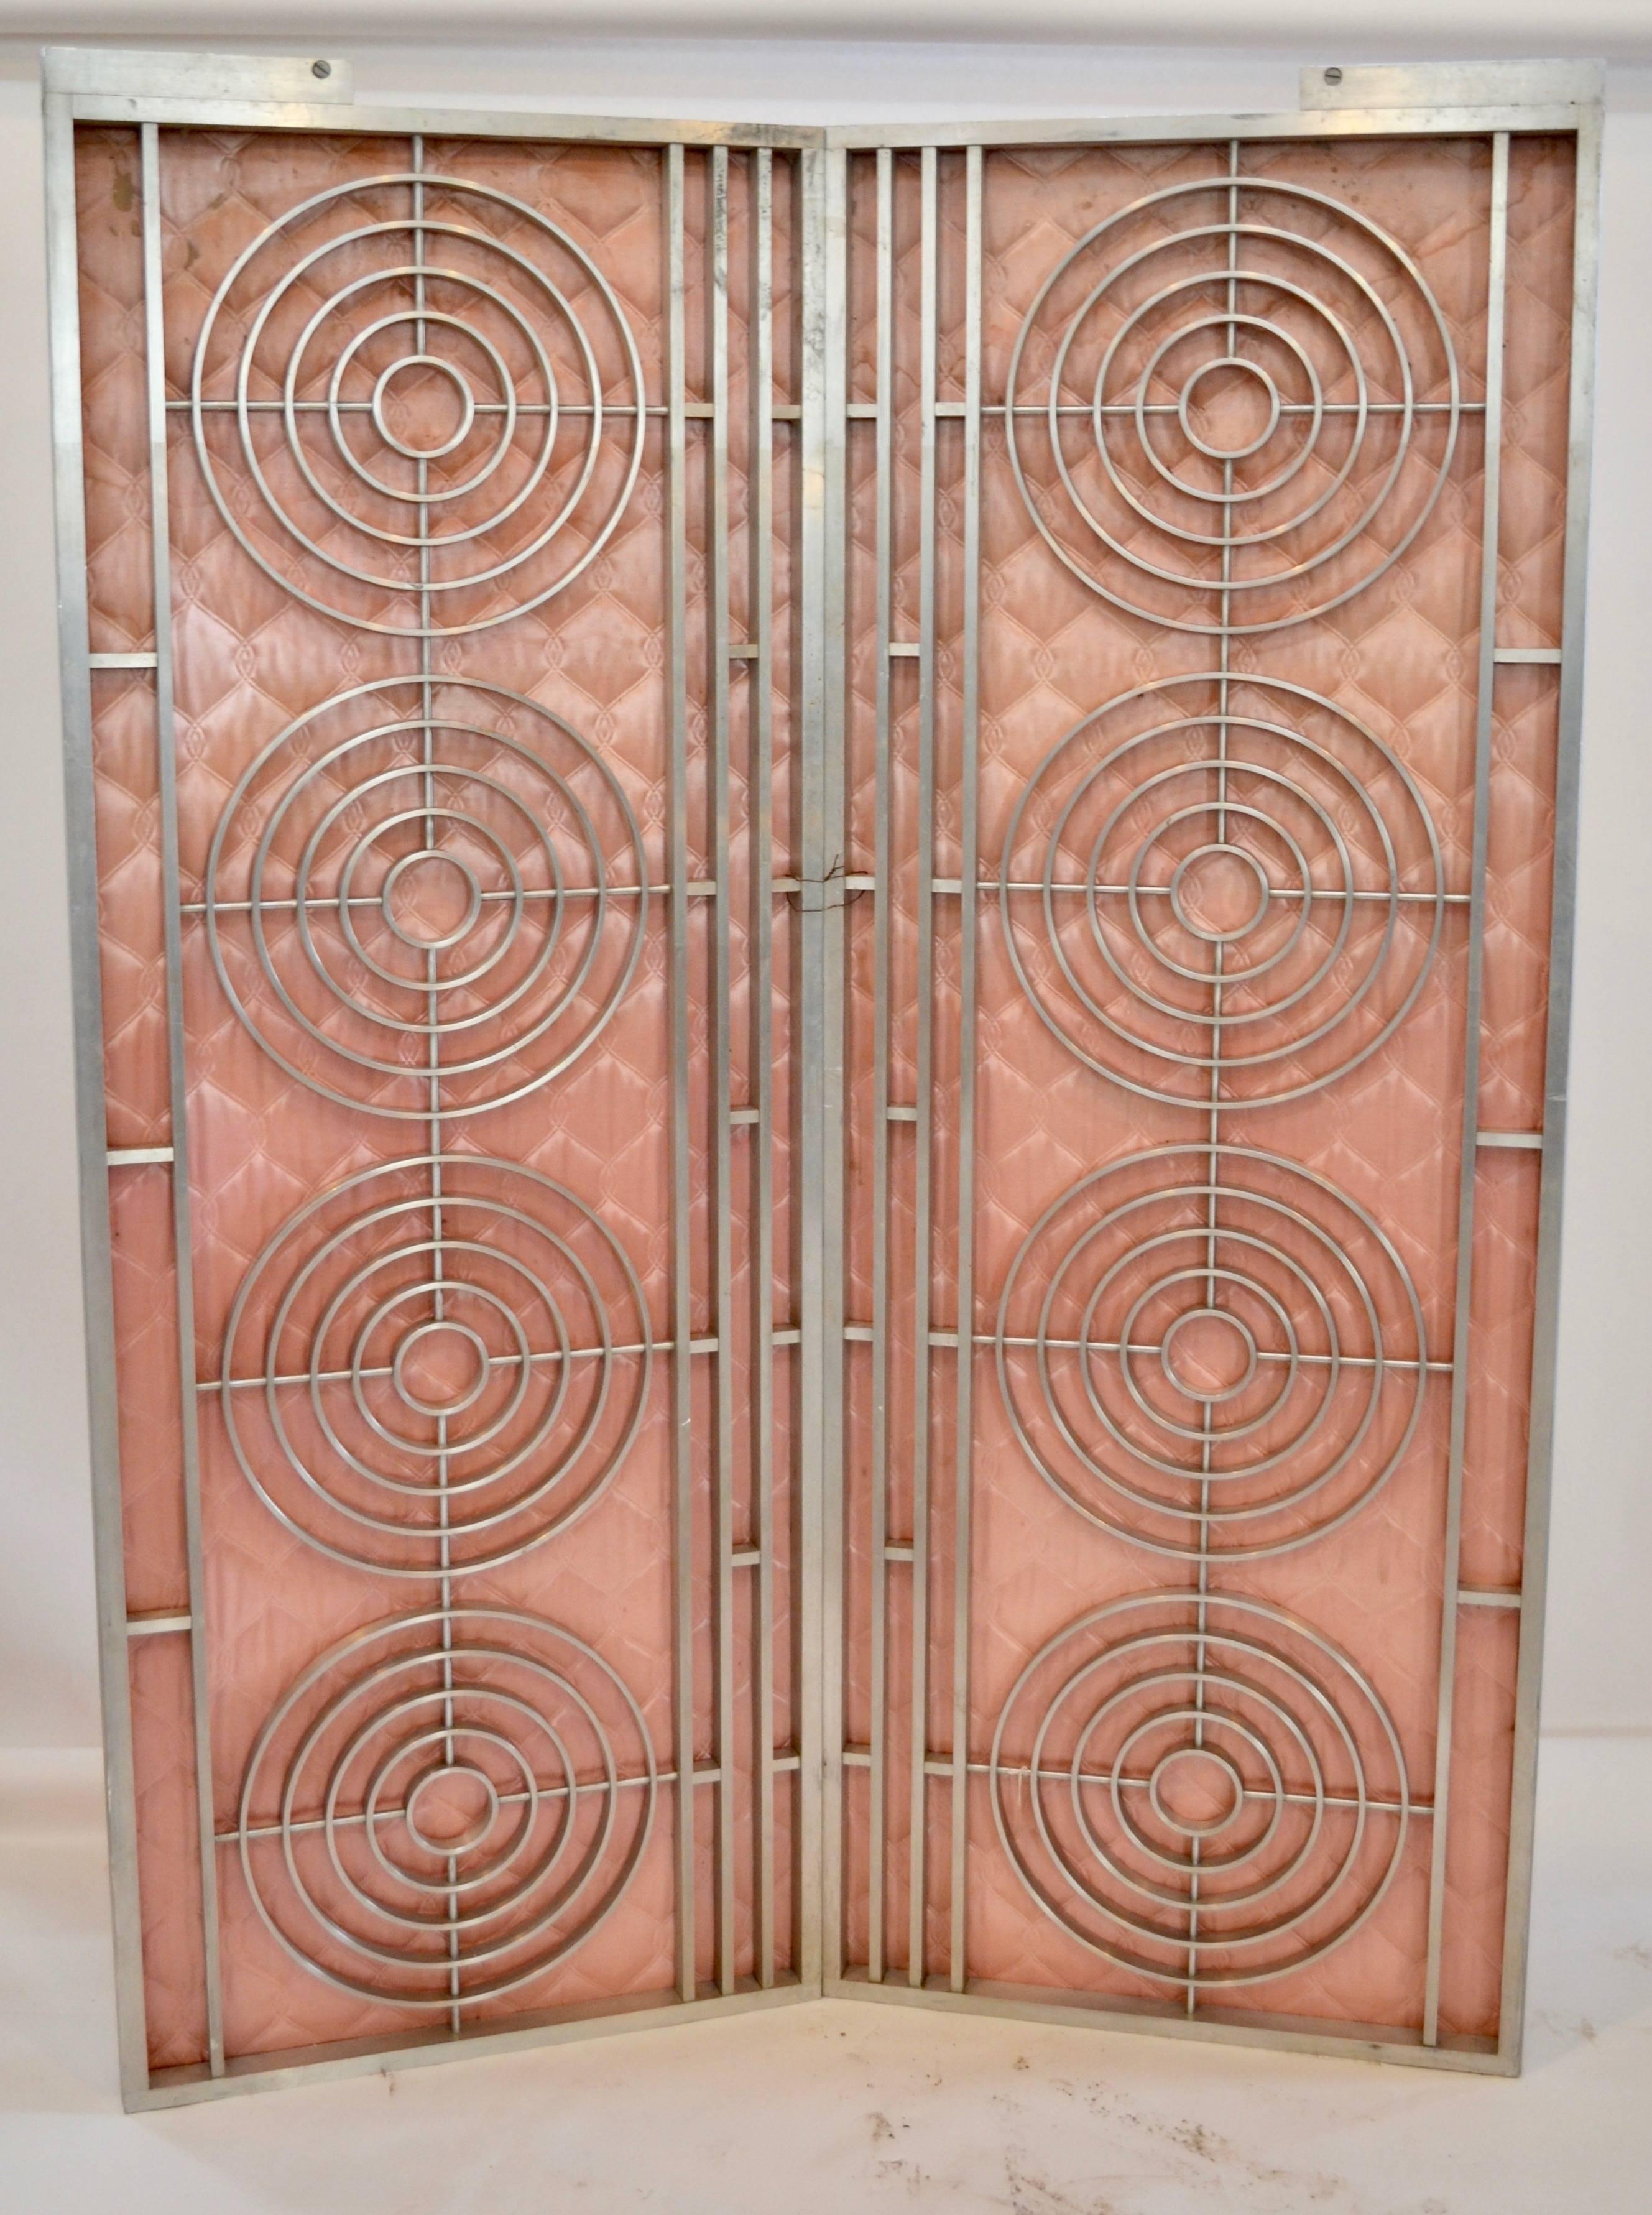 Pair of moderne interior gates with pink paneled upholstery sourced from the textile baron Henry Magee residence in Bloomberg, PA. Each gate features four concentric five ring ornaments in brushed over brass.